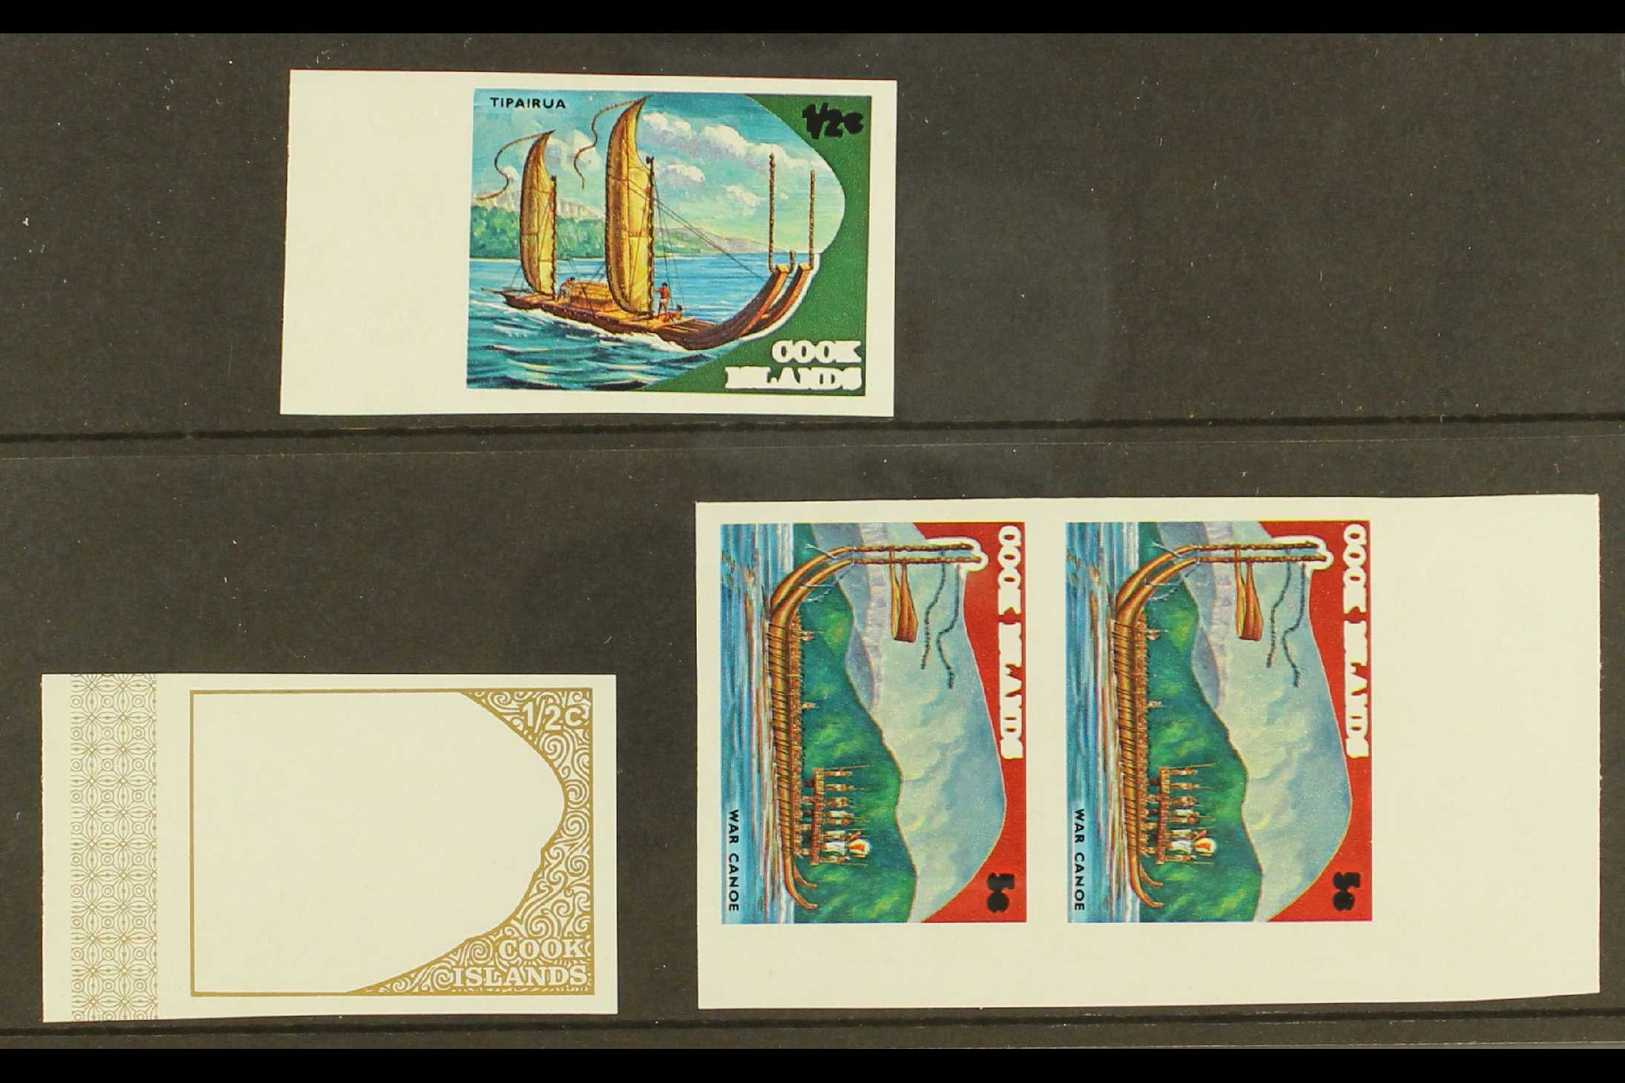 1973 IMPERF PLATE PROOFS  An Attractive Selection From The Maori Exploration Issue With ½c Gold Frame & Coloured "Tipair - Cook